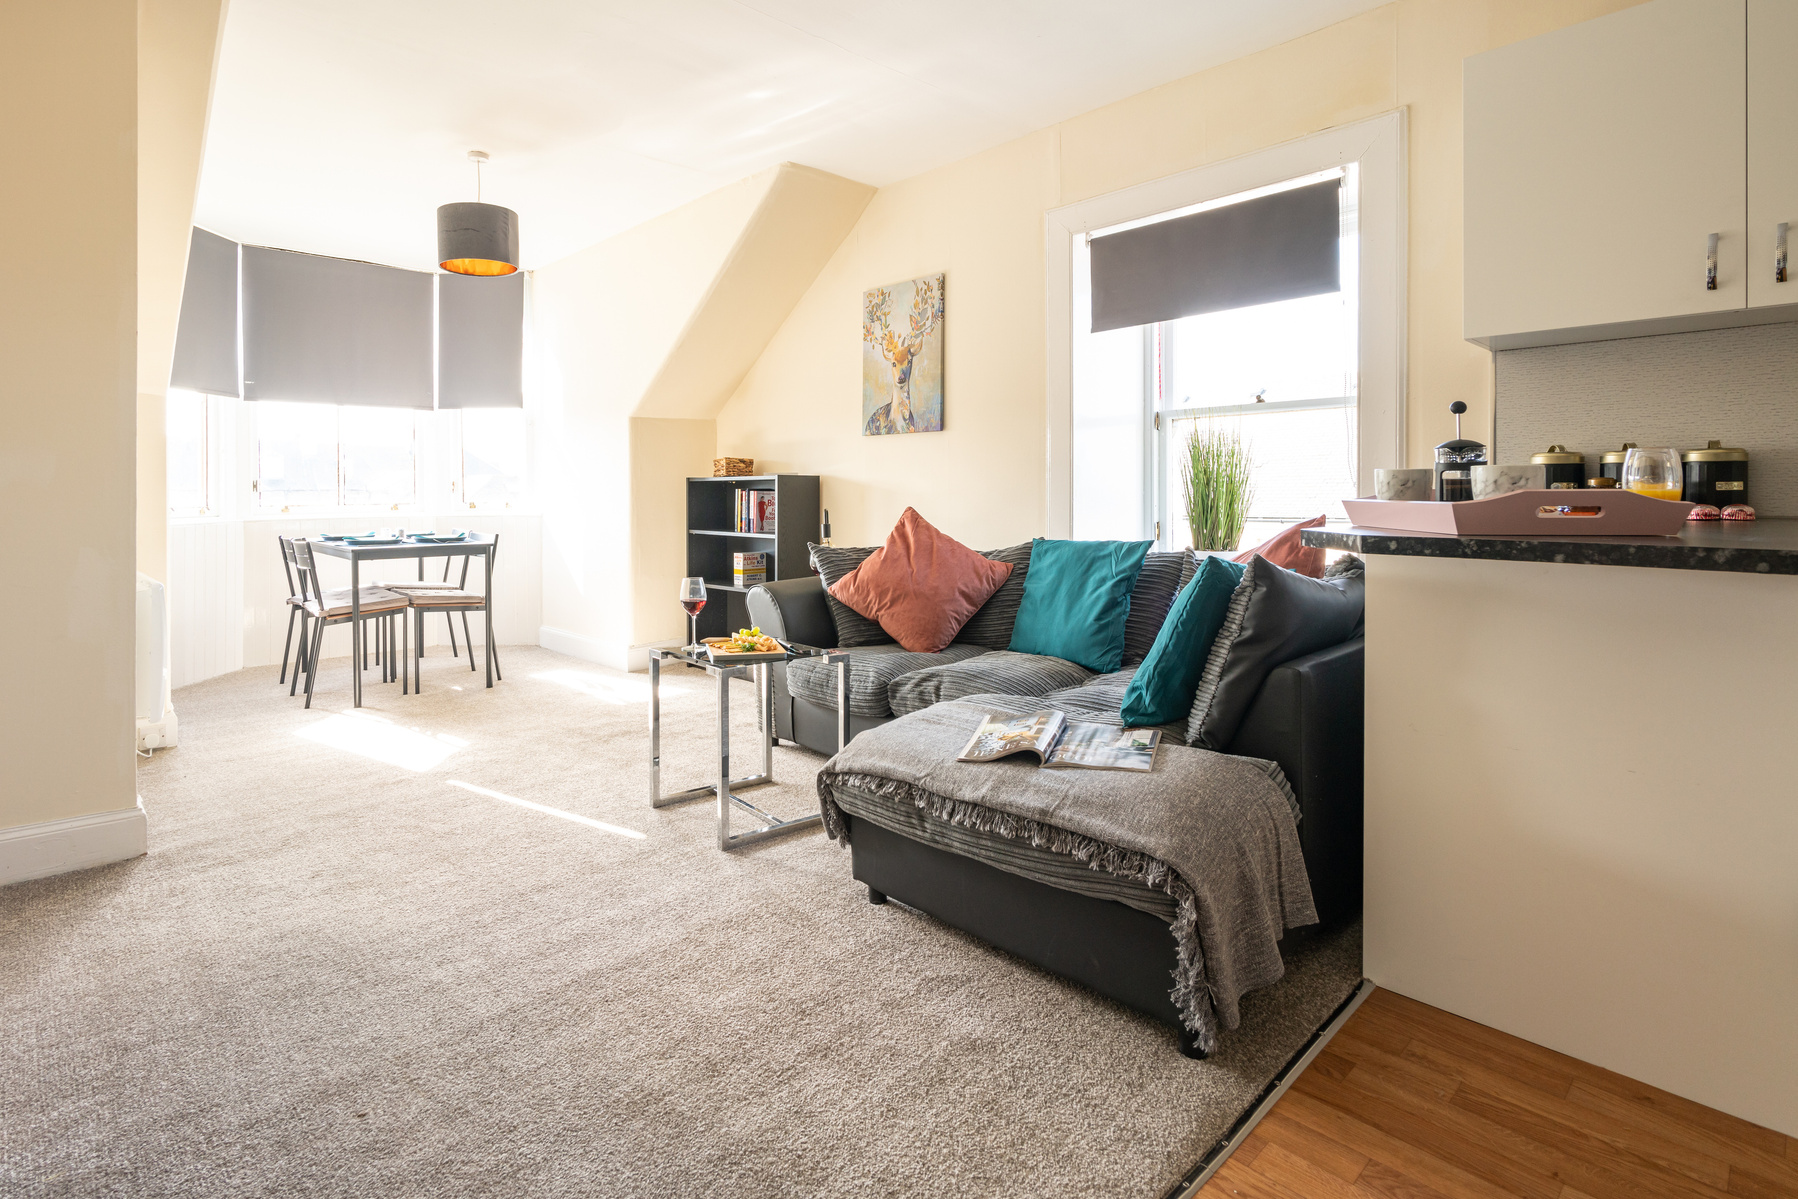 Pre-edited flat image for Scotland Interior HDR Property - Photography by Nate Cleary